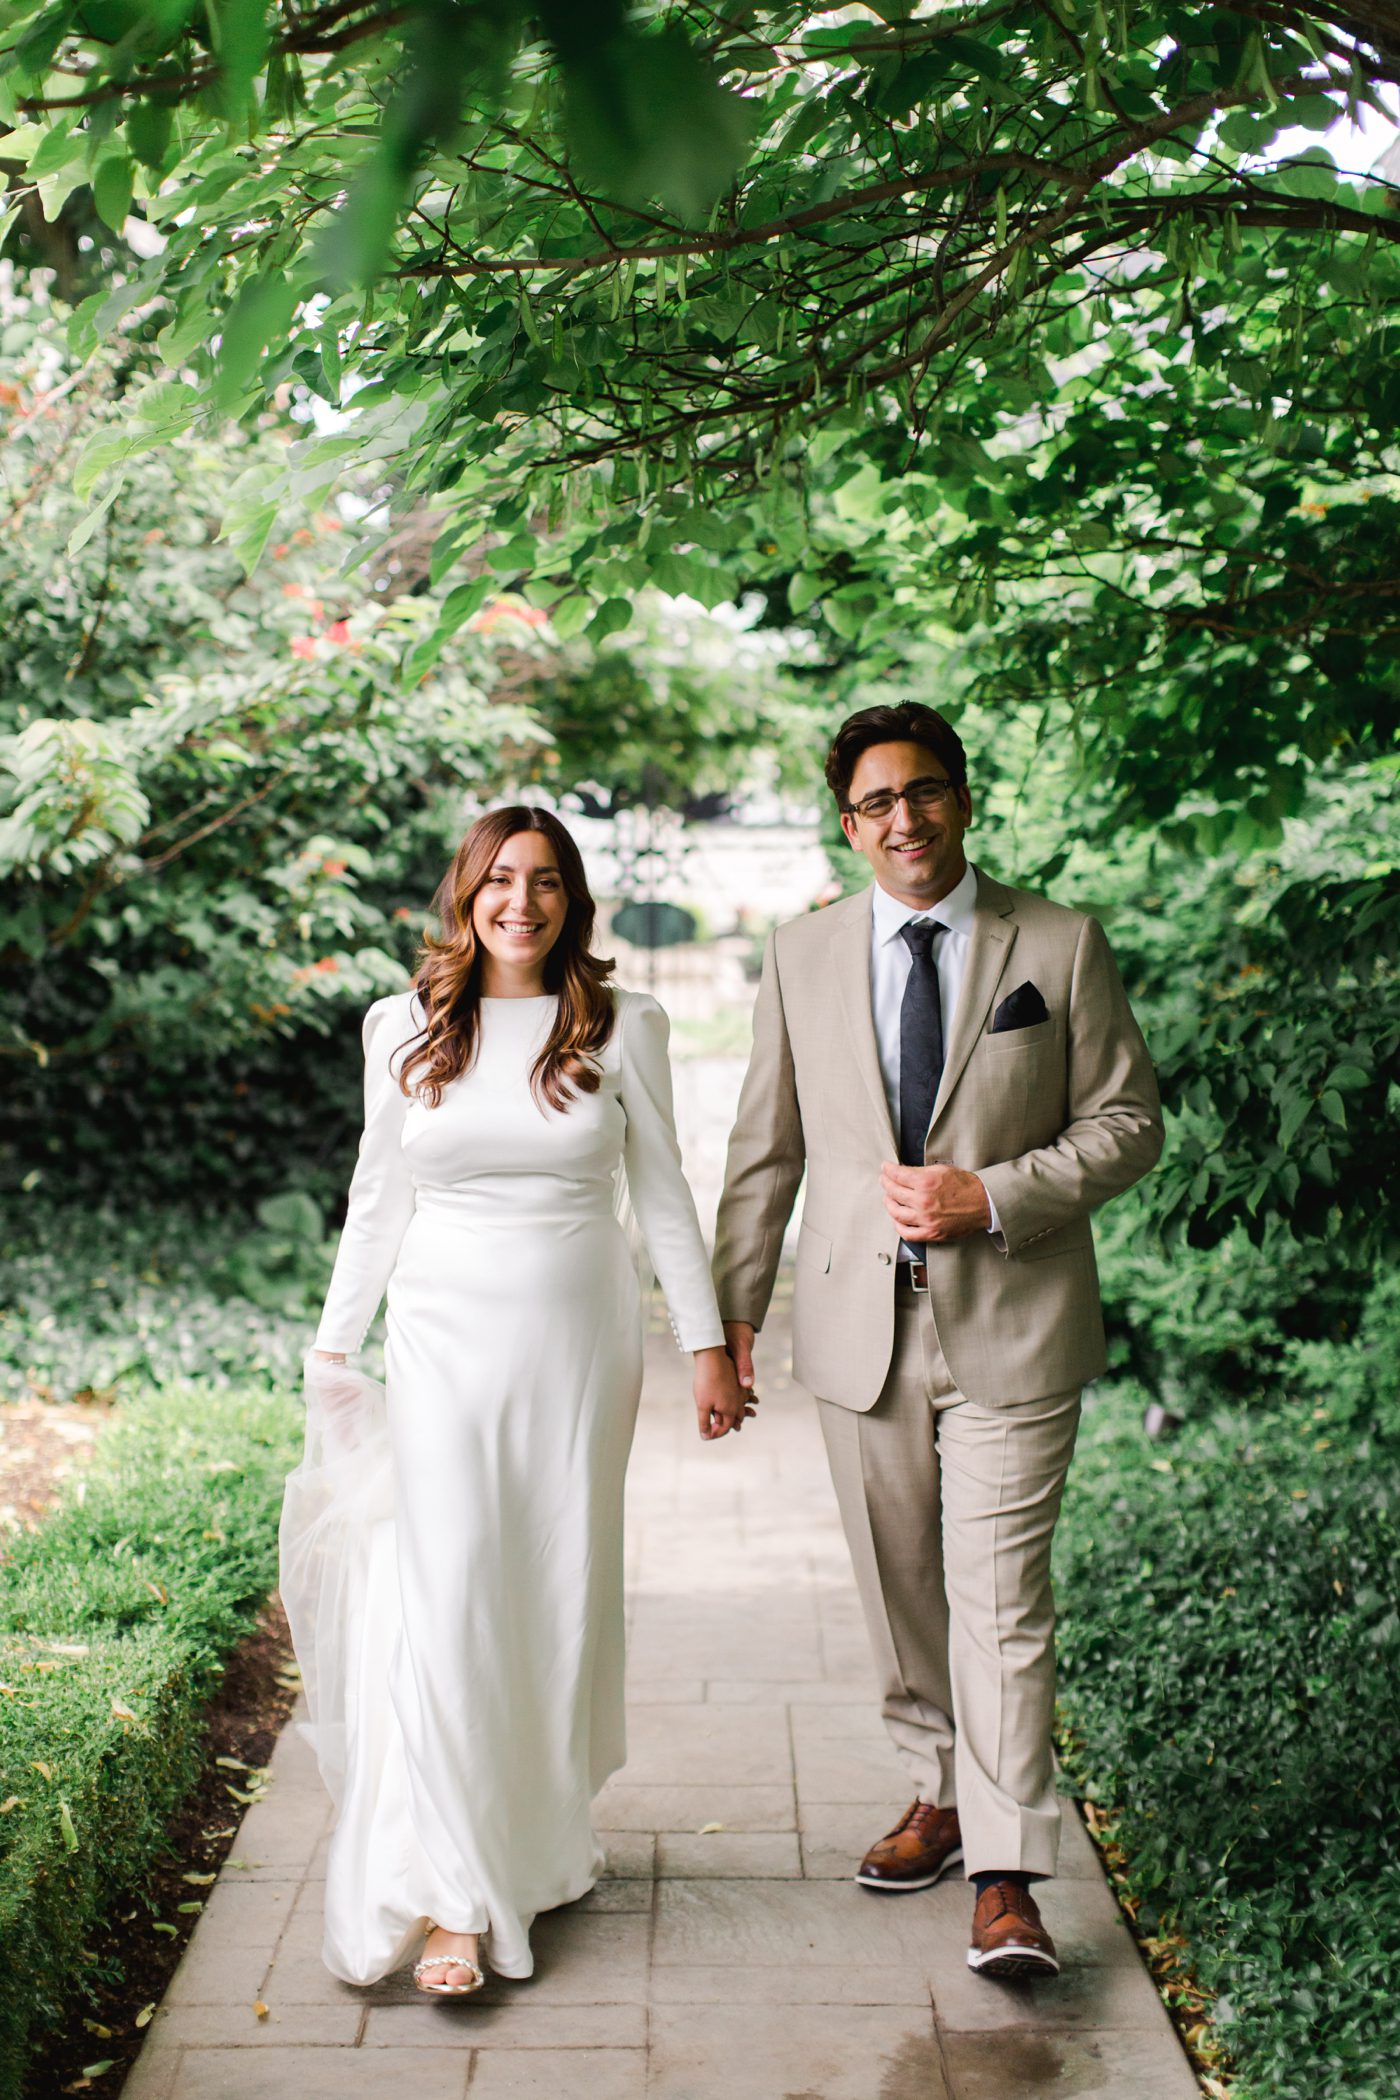 Bride and groom garden portraits at The Garret Club